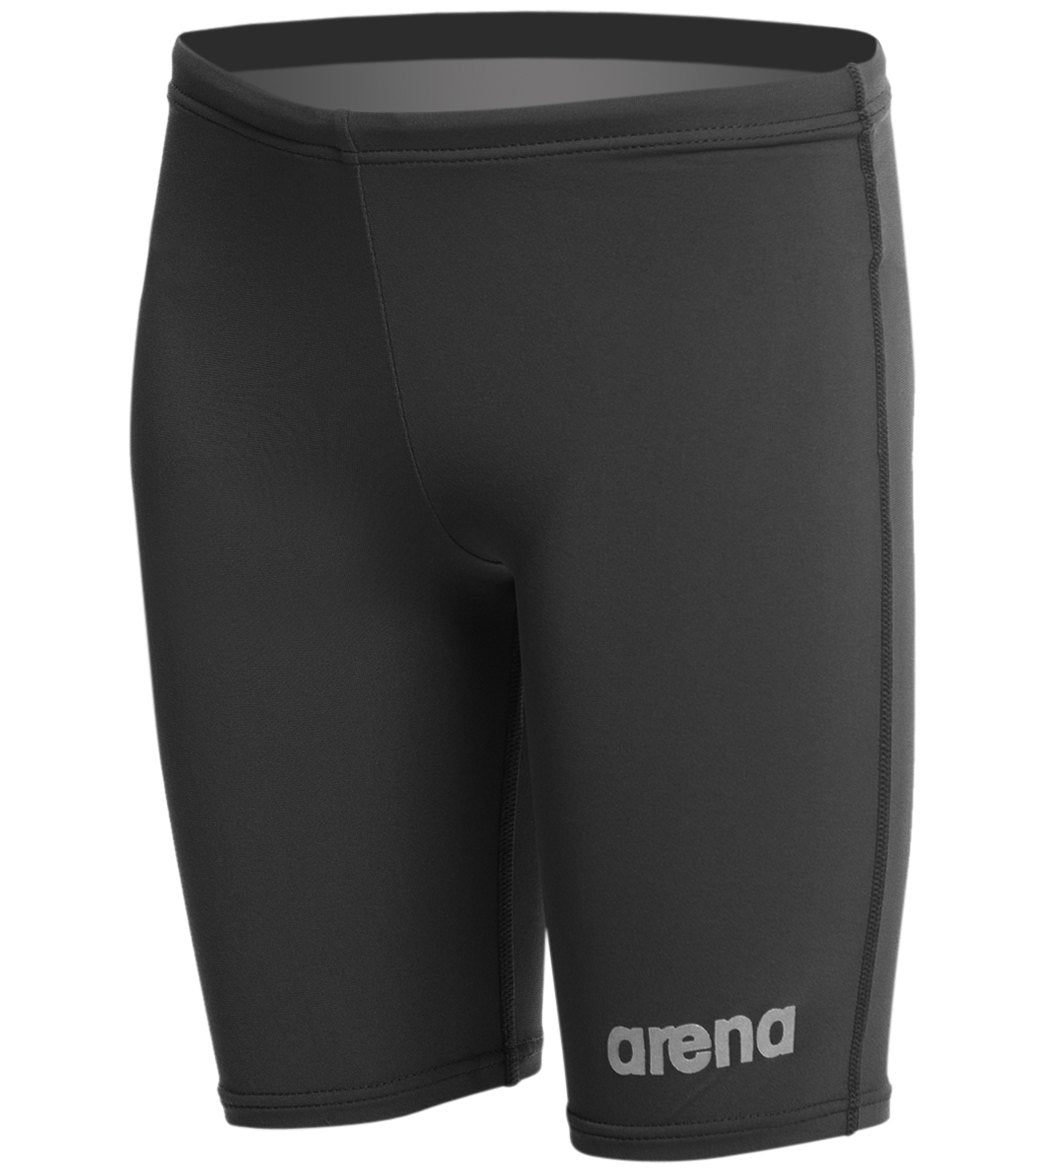 Arena Boys' Board Jammer Swimsuit Black/Metallic Silver at SwimOutlet.com